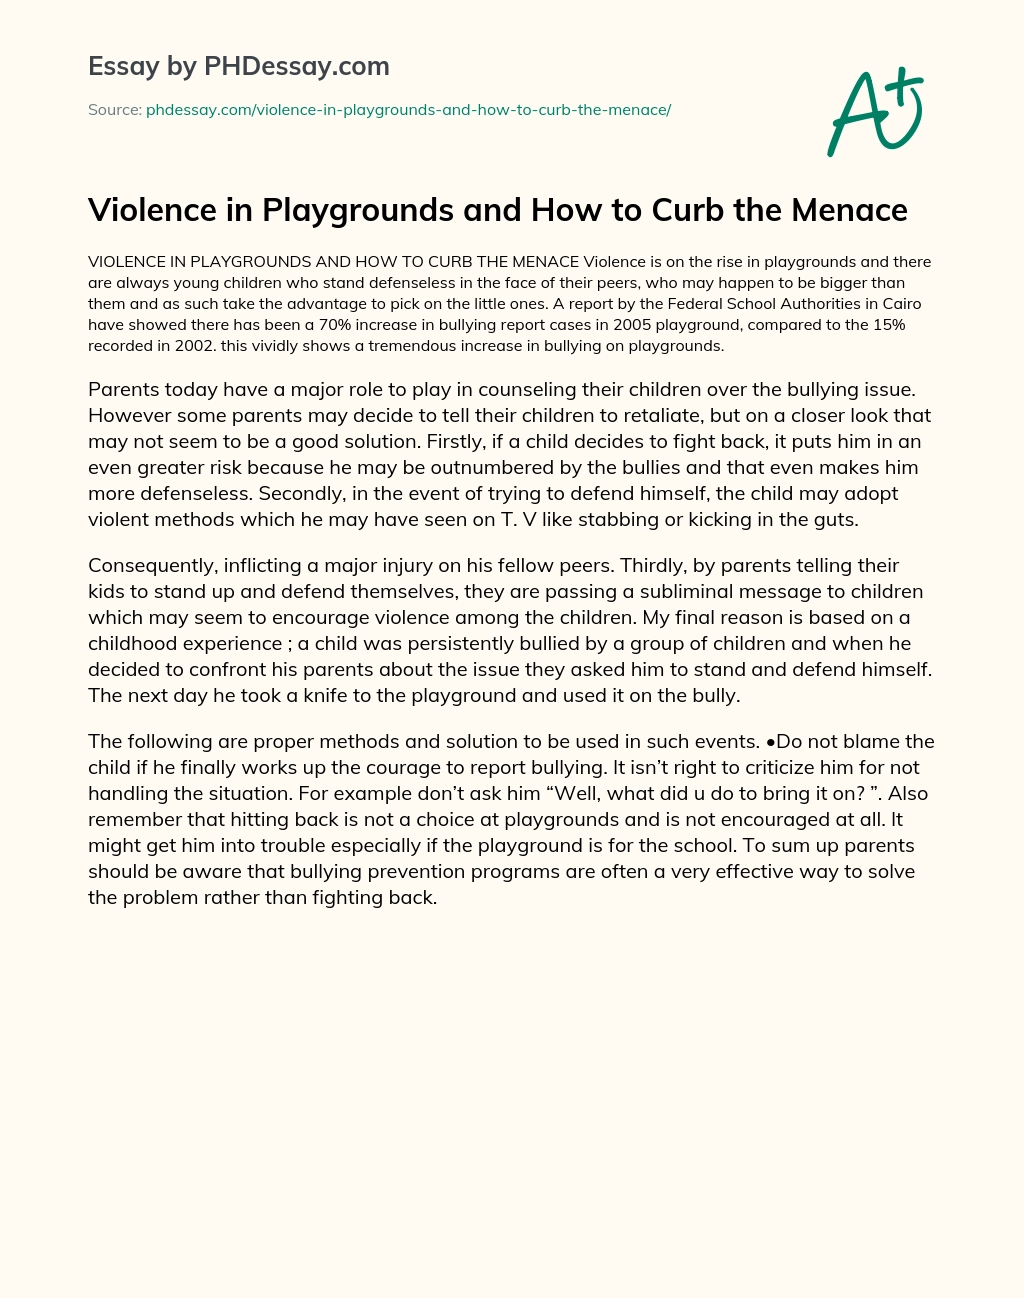 Violence in Playgrounds and How to Curb the Menace essay